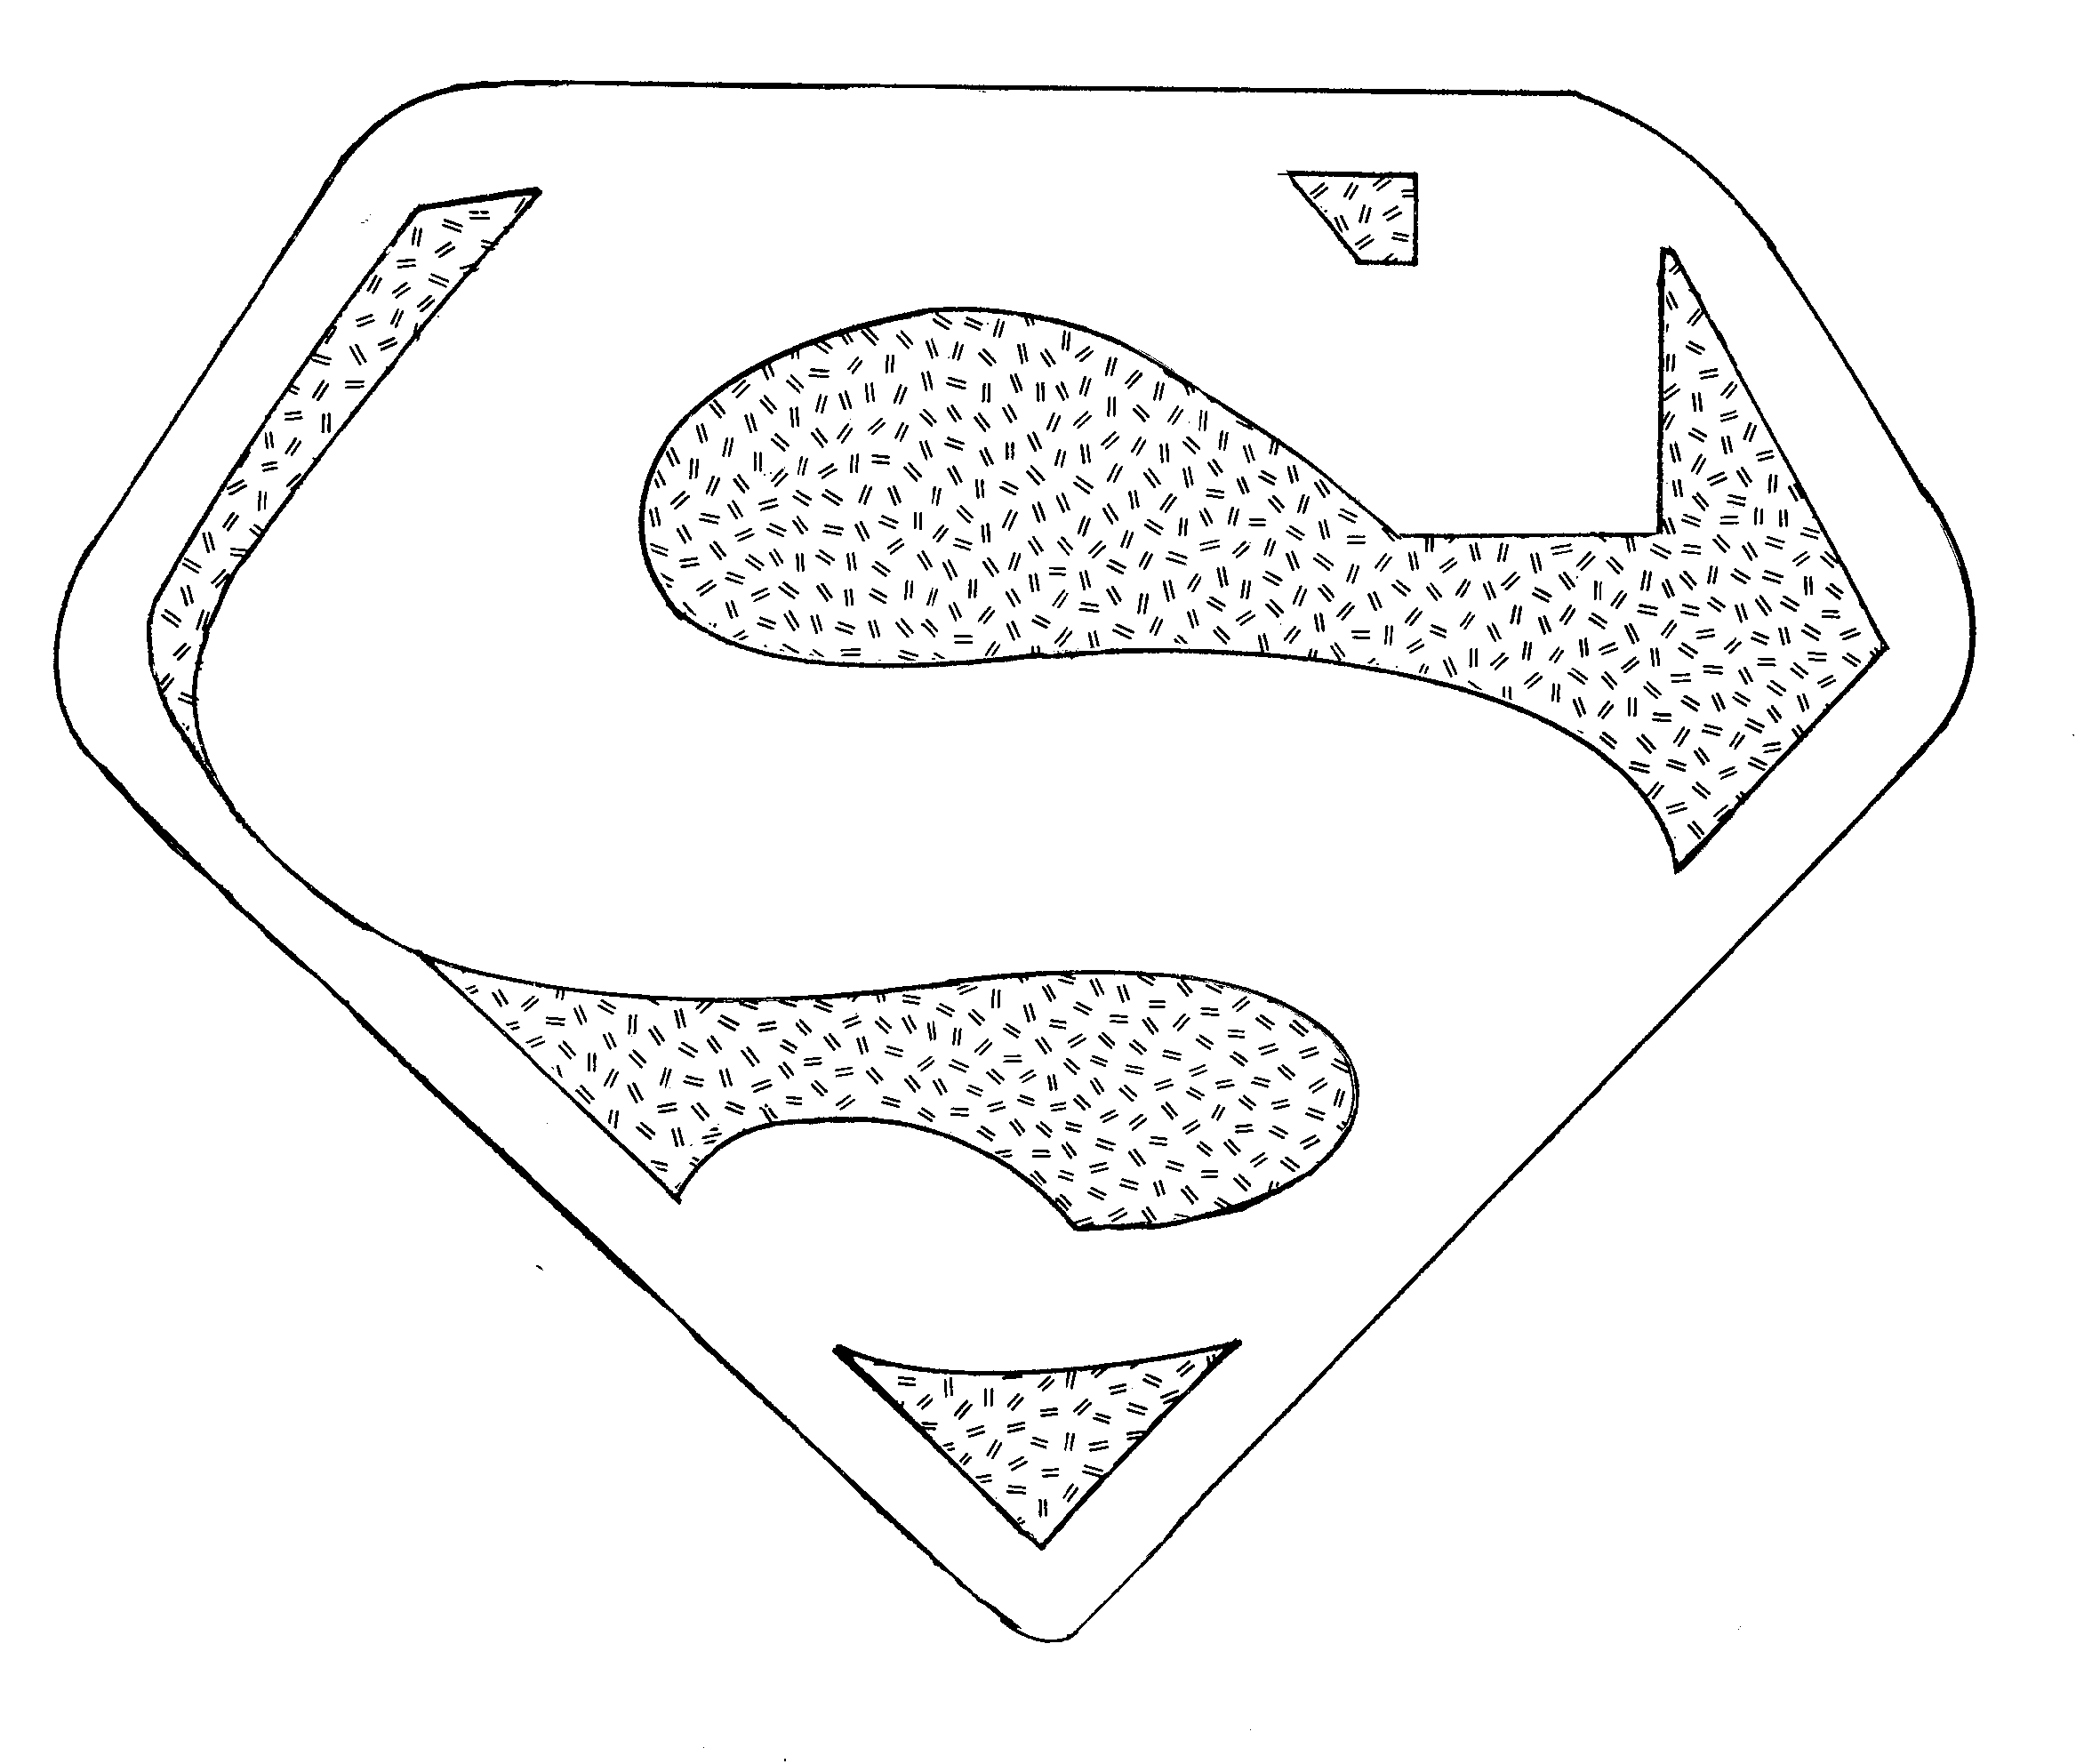 free-printable-superman-coloring-pages-for-kids